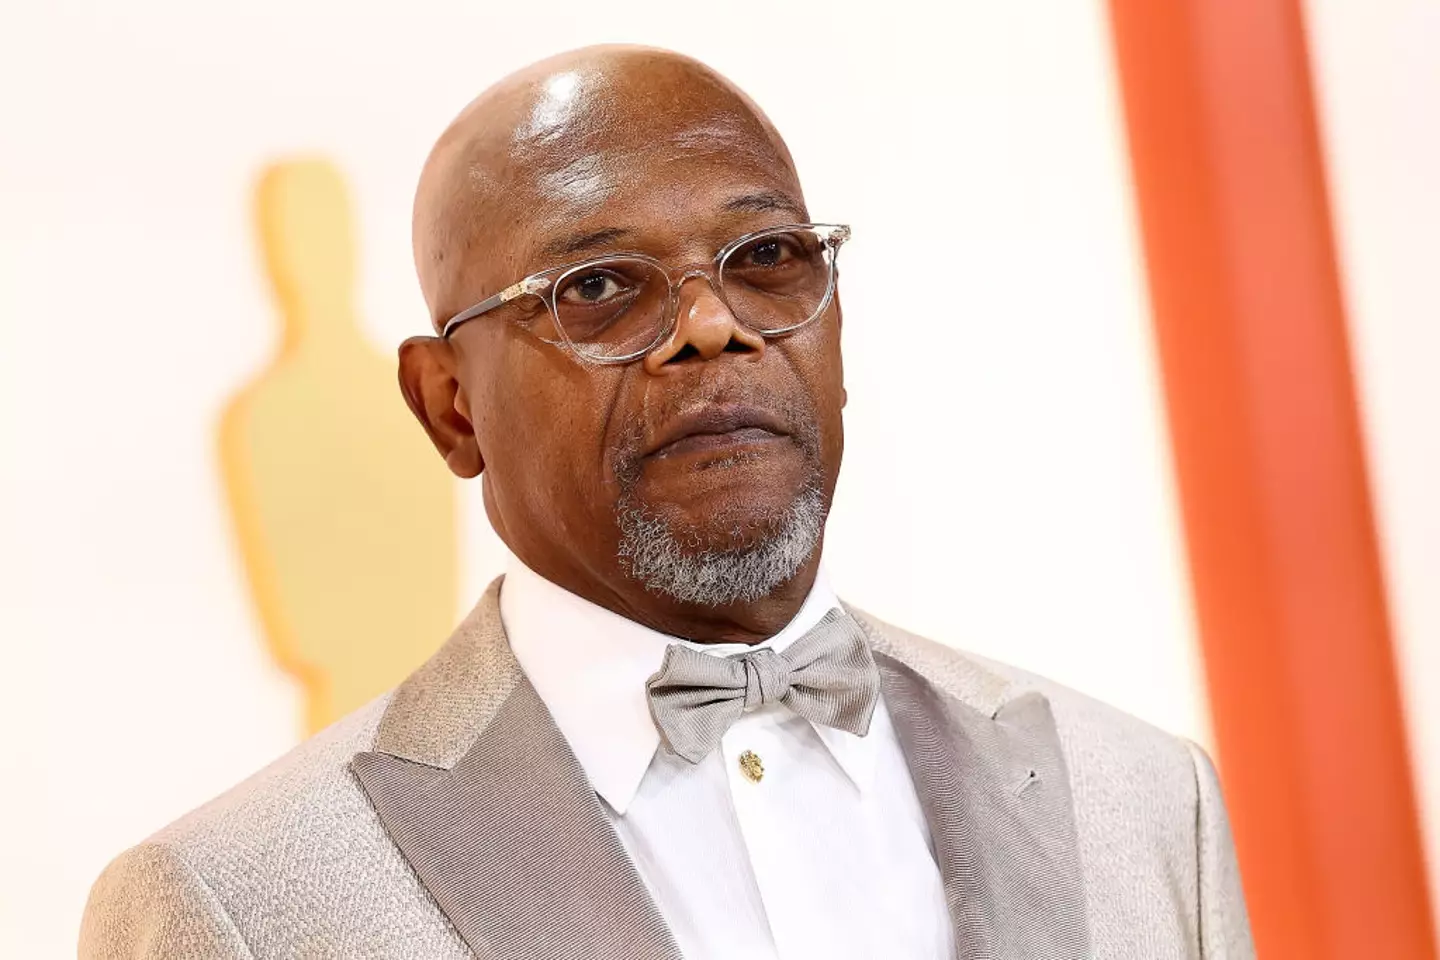 Samuel L Jackson has shared the line his fans quote at him the most.